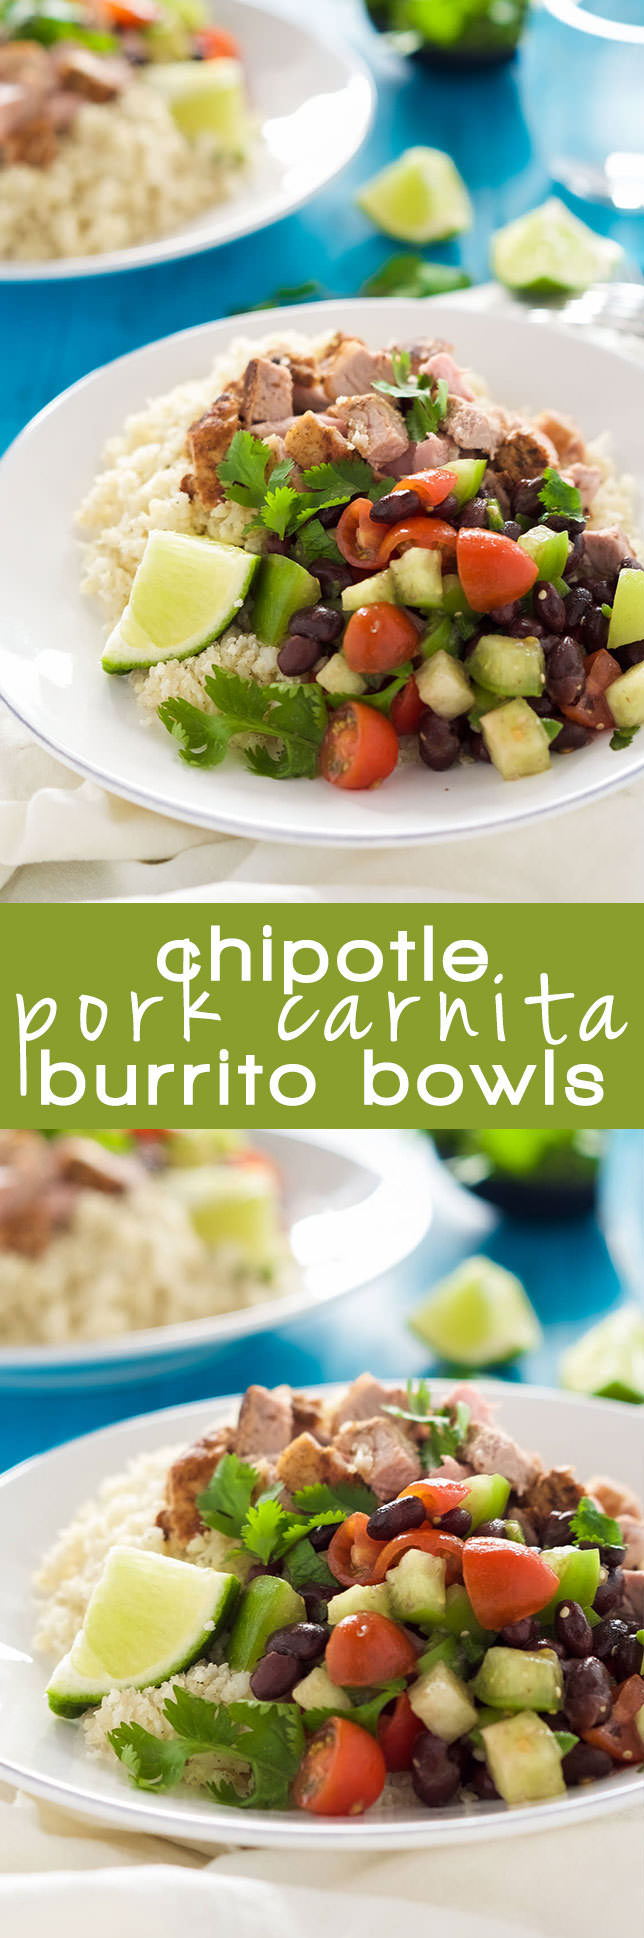 Chipotle Pork Carnita Burrito Bowls with Cumin Lime Rice are a healthy, homemade tex mex favorite! Filled with juicy, spiced pork, a homemade black bean salsa and lightened up cumin lime cauliflower rice!